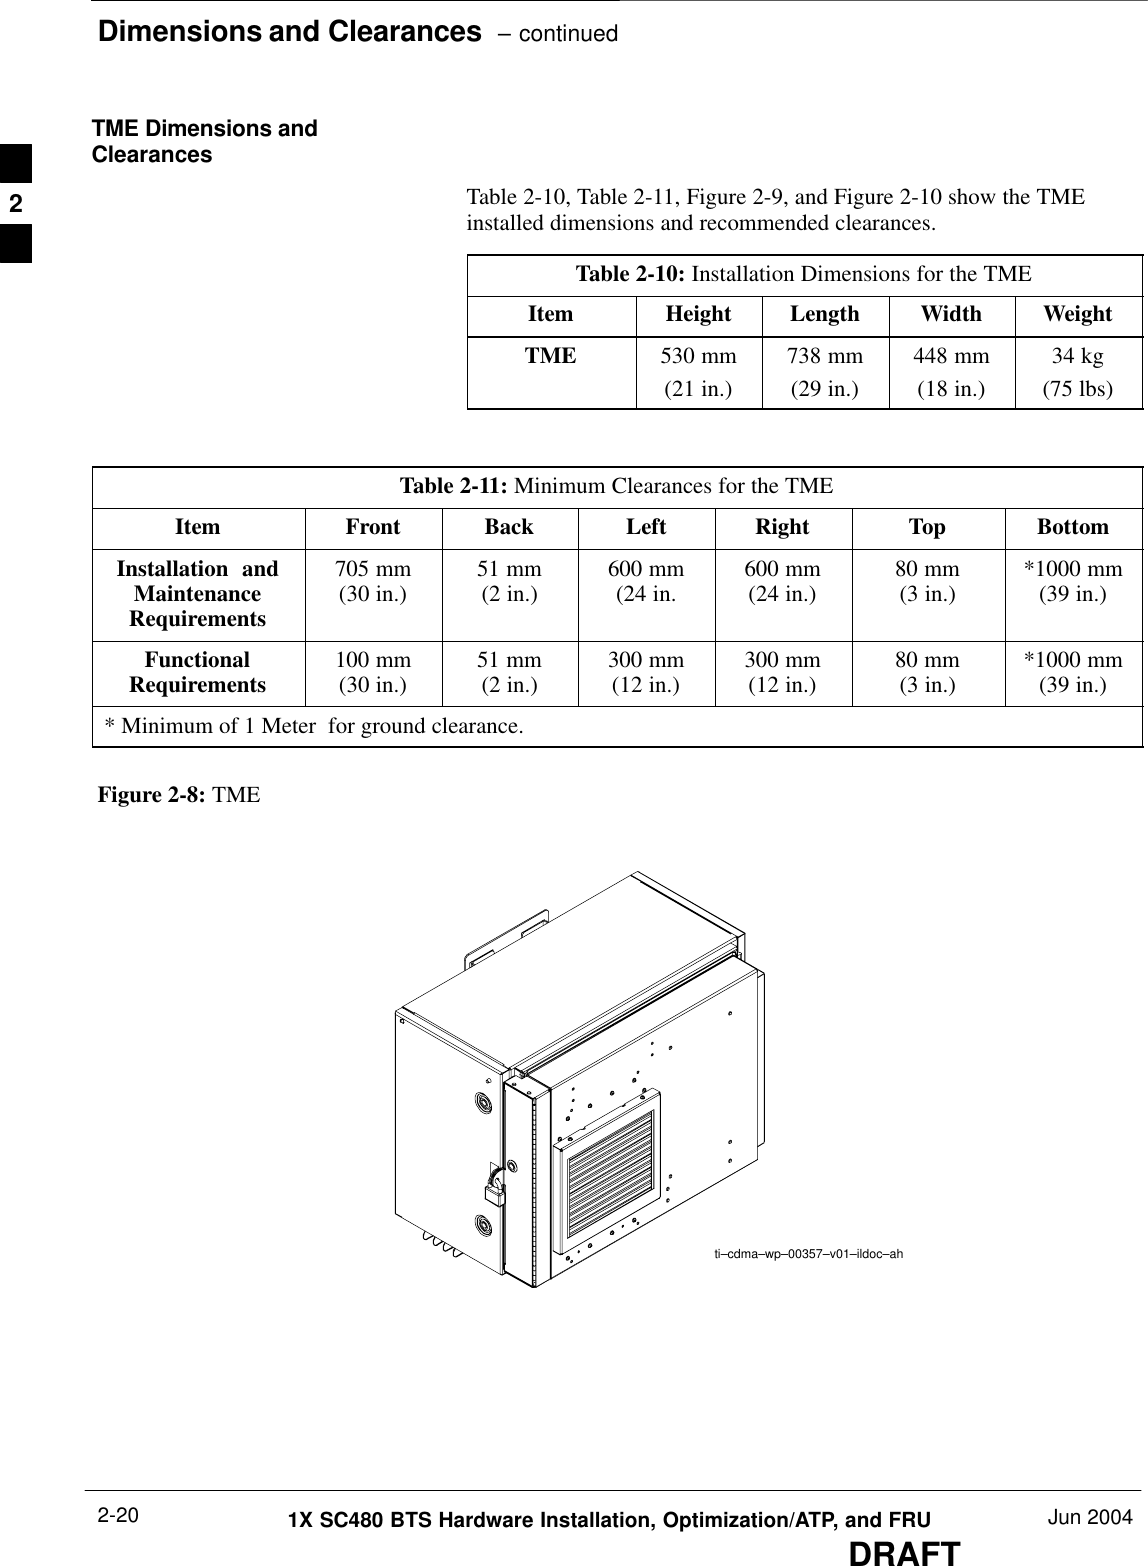 Dimensions and Clearances  – continuedDRAFT1X SC480 BTS Hardware Installation, Optimization/ATP, and FRU Jun 20042-20TME Dimensions andClearancesTable 2-10, Table 2-11, Figure 2-9, and Figure 2-10 show the TMEinstalled dimensions and recommended clearances.Table 2-10: Installation Dimensions for the TMEItem Height Length Width WeightTME 530 mm(21 in.)738 mm(29 in.)448 mm(18 in.)34 kg(75 lbs)Table 2-11: Minimum Clearances for the TMEItem Front Back Left Right Top BottomInstallation  andMaintenanceRequirements705 mm(30 in.) 51 mm(2 in.) 600 mm(24 in. 600 mm(24 in.) 80 mm(3 in.) *1000 mm(39 in.)FunctionalRequirements 100 mm(30 in.) 51 mm(2 in.) 300 mm(12 in.) 300 mm(12 in.) 80 mm(3 in.) *1000 mm(39 in.)* Minimum of 1 Meter  for ground clearance.Figure 2-8: TMEti–cdma–wp–00357–v01–ildoc–ah2